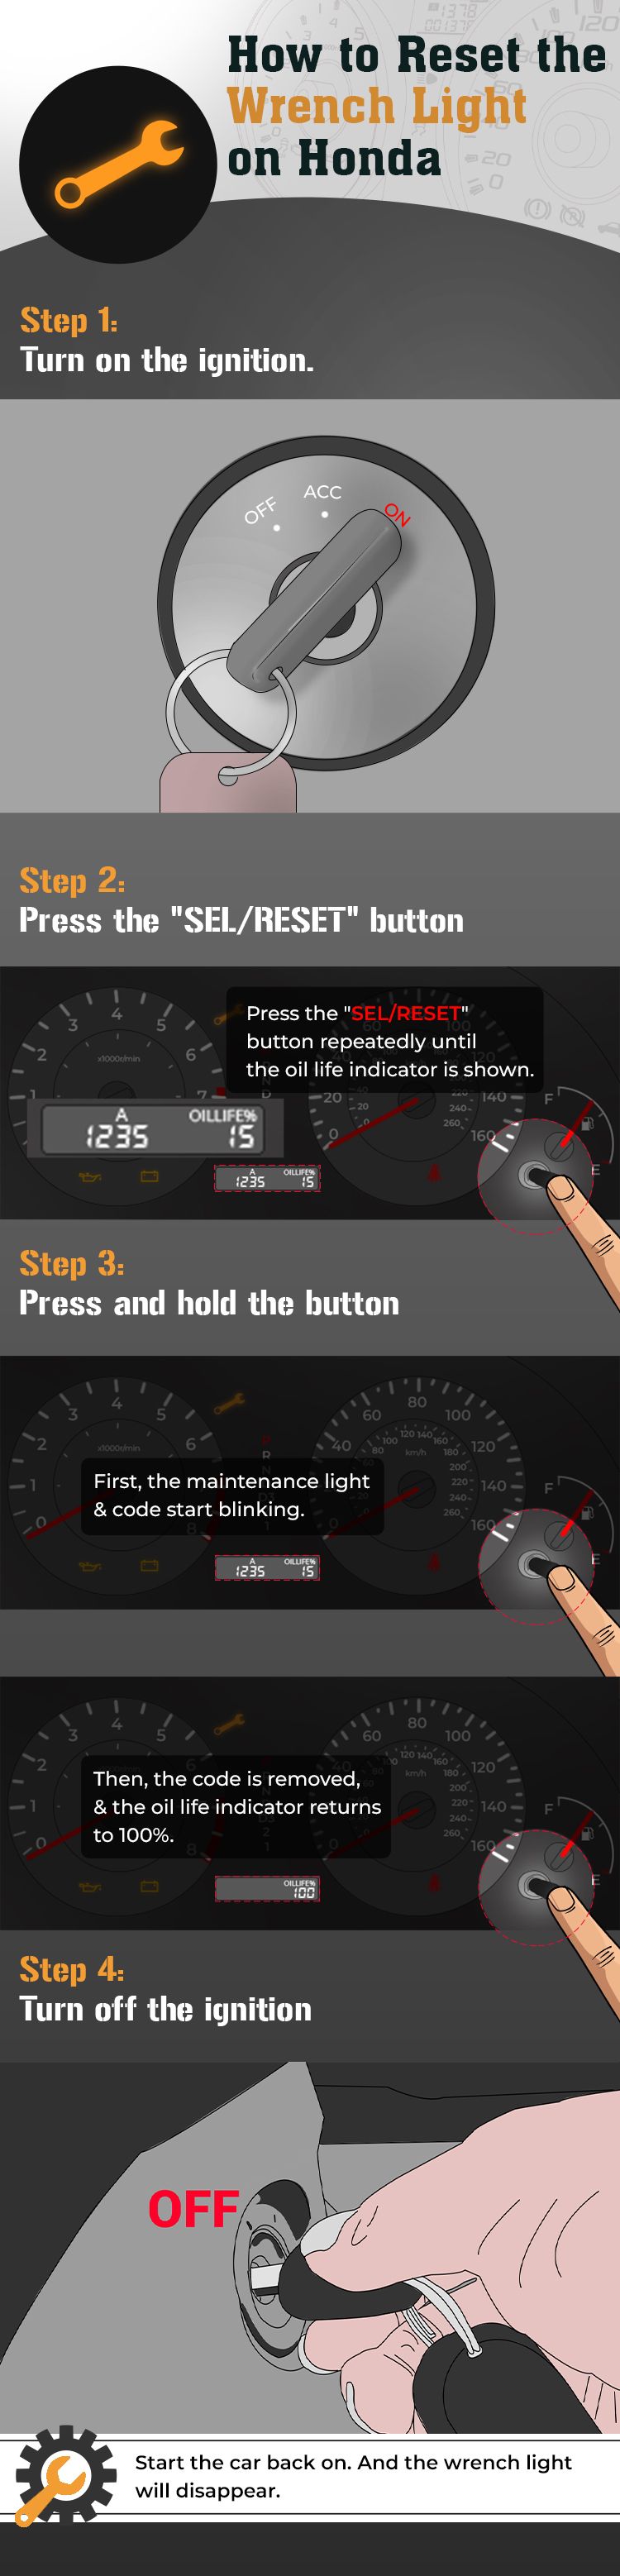 How to Reset the Wrench Light on Honda